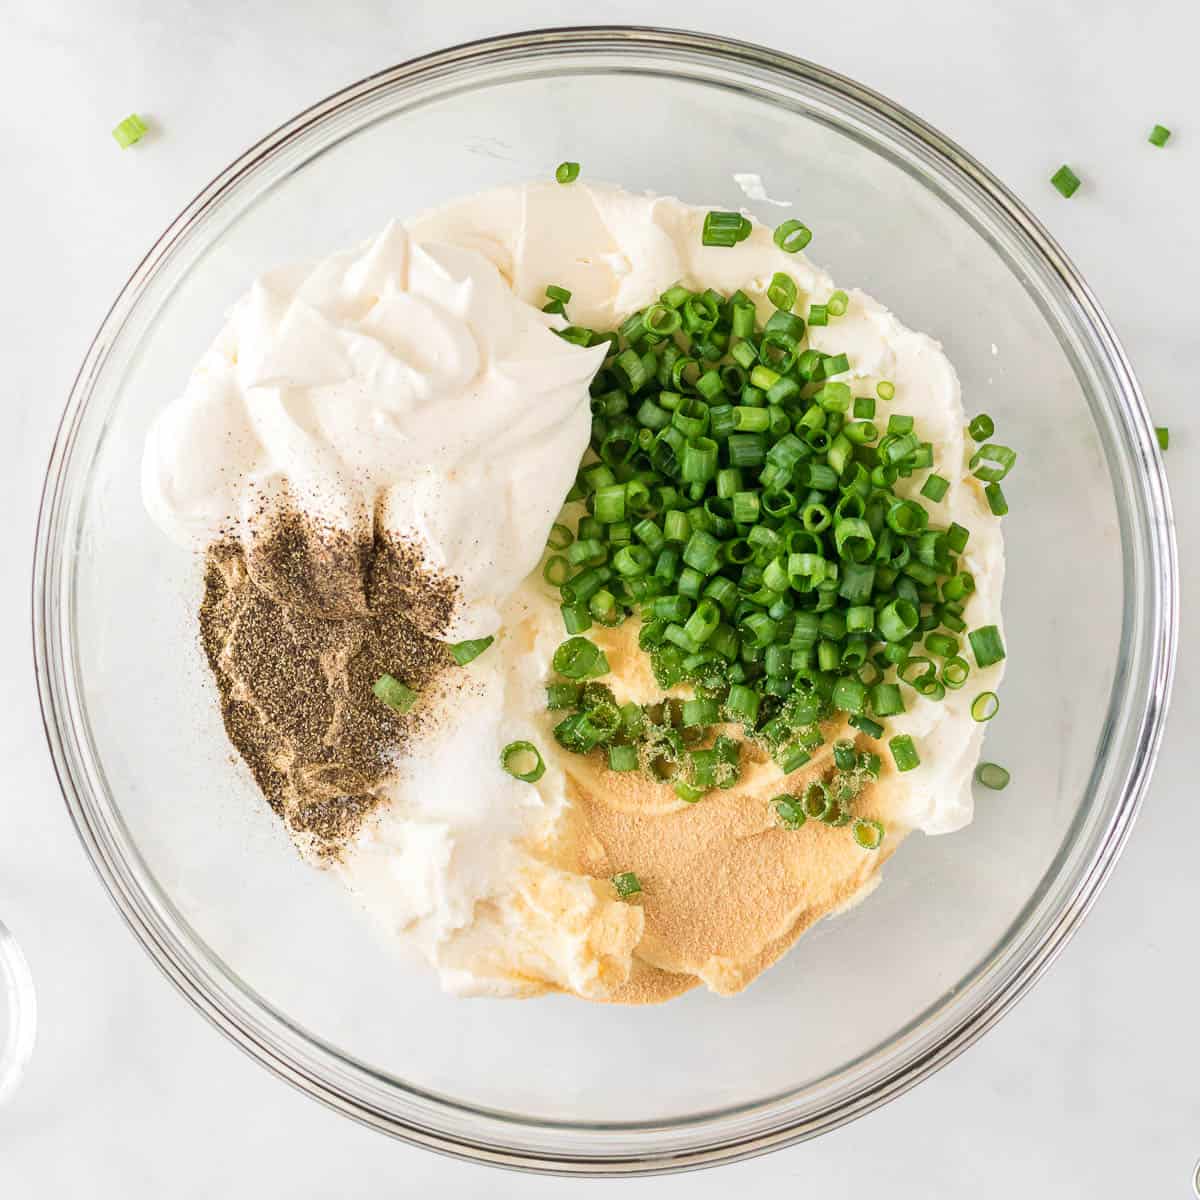 cream cheese, sour cream, green onions, and spices in a bowl